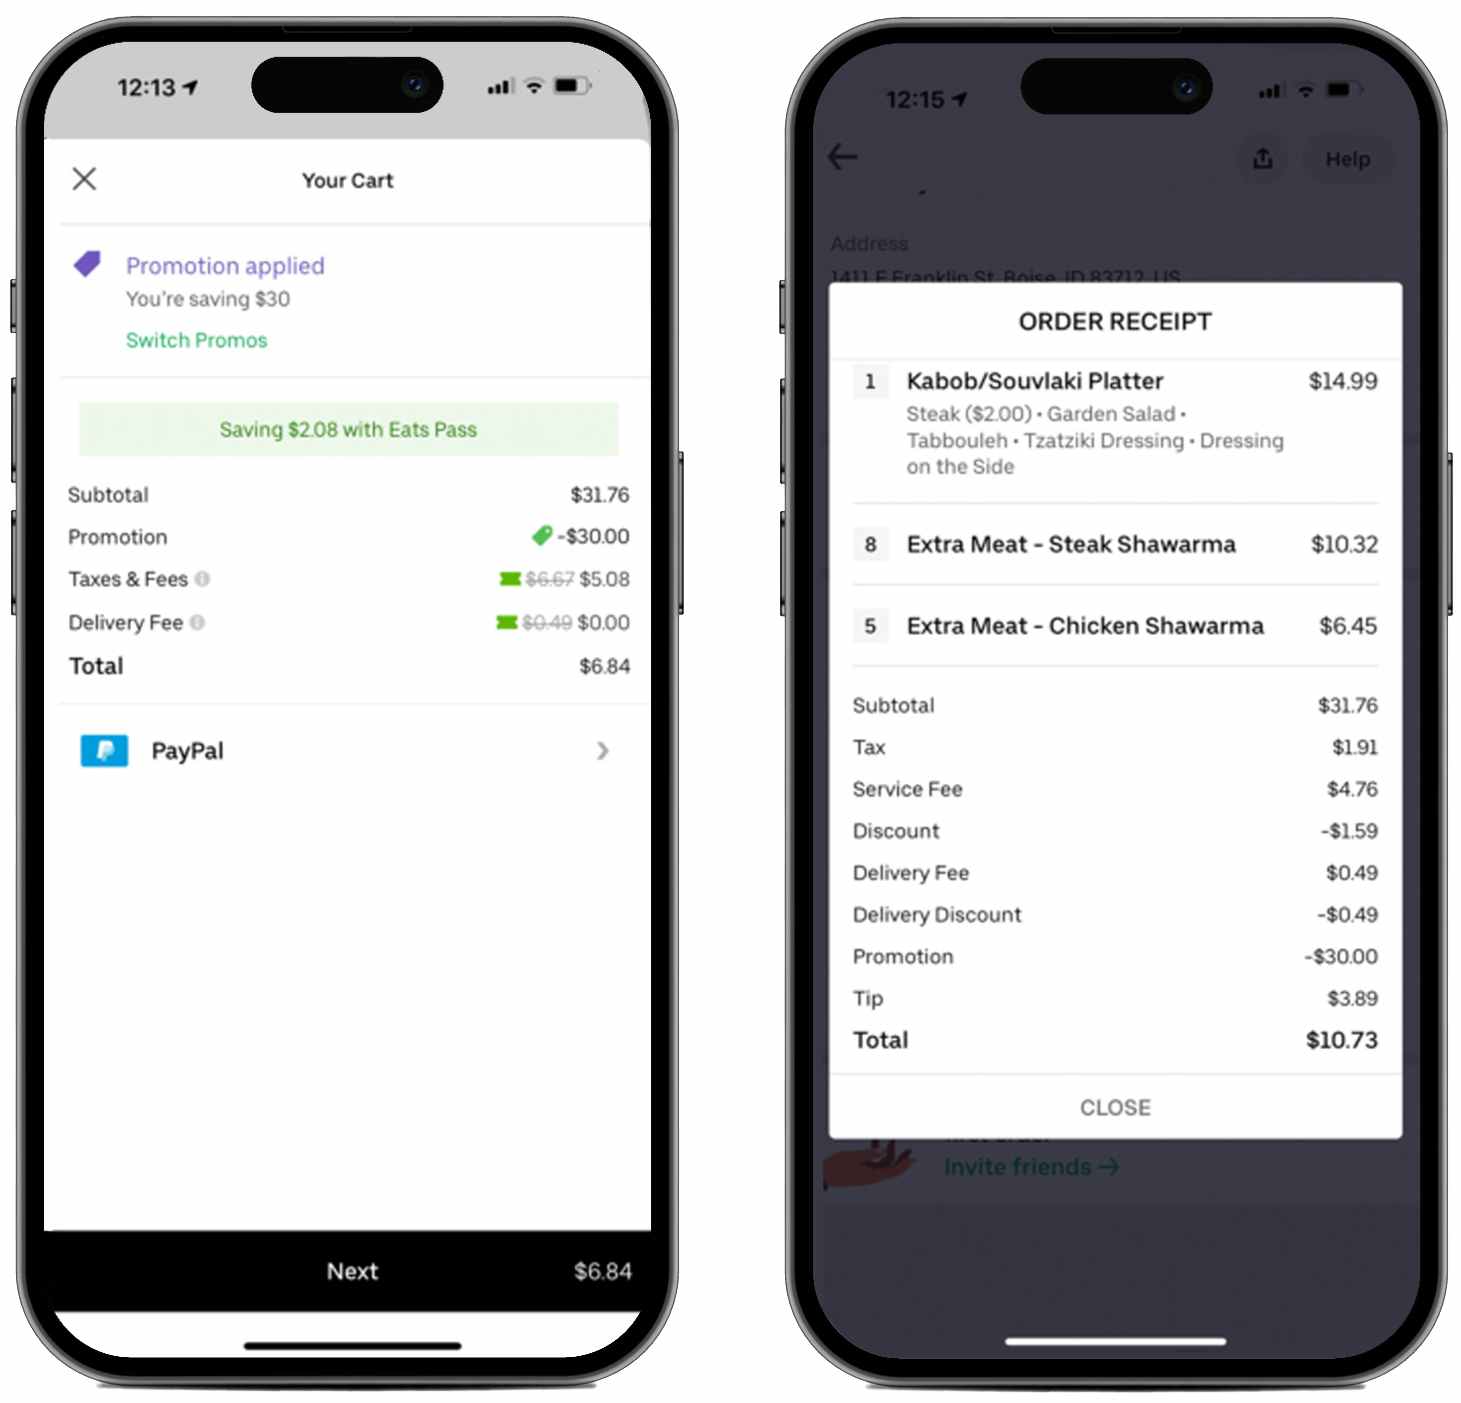 Two phones, one displaying an Uber Eats checkout screen with the total including fees, and the other displaying the order receipt